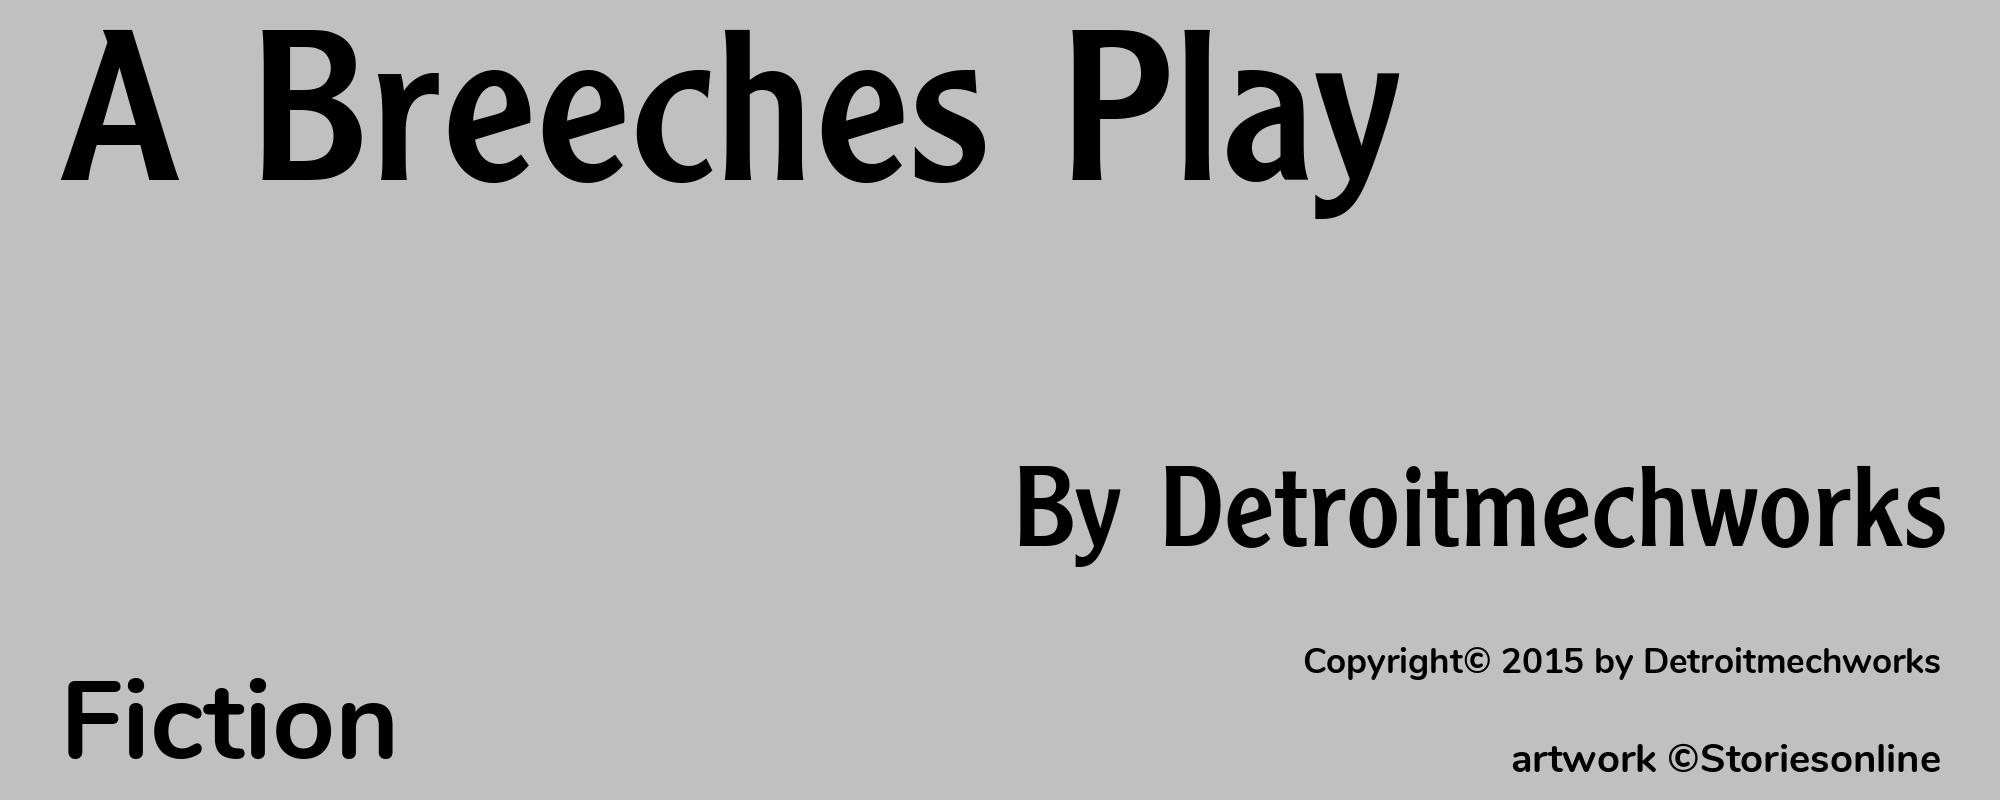 A Breeches Play - Cover